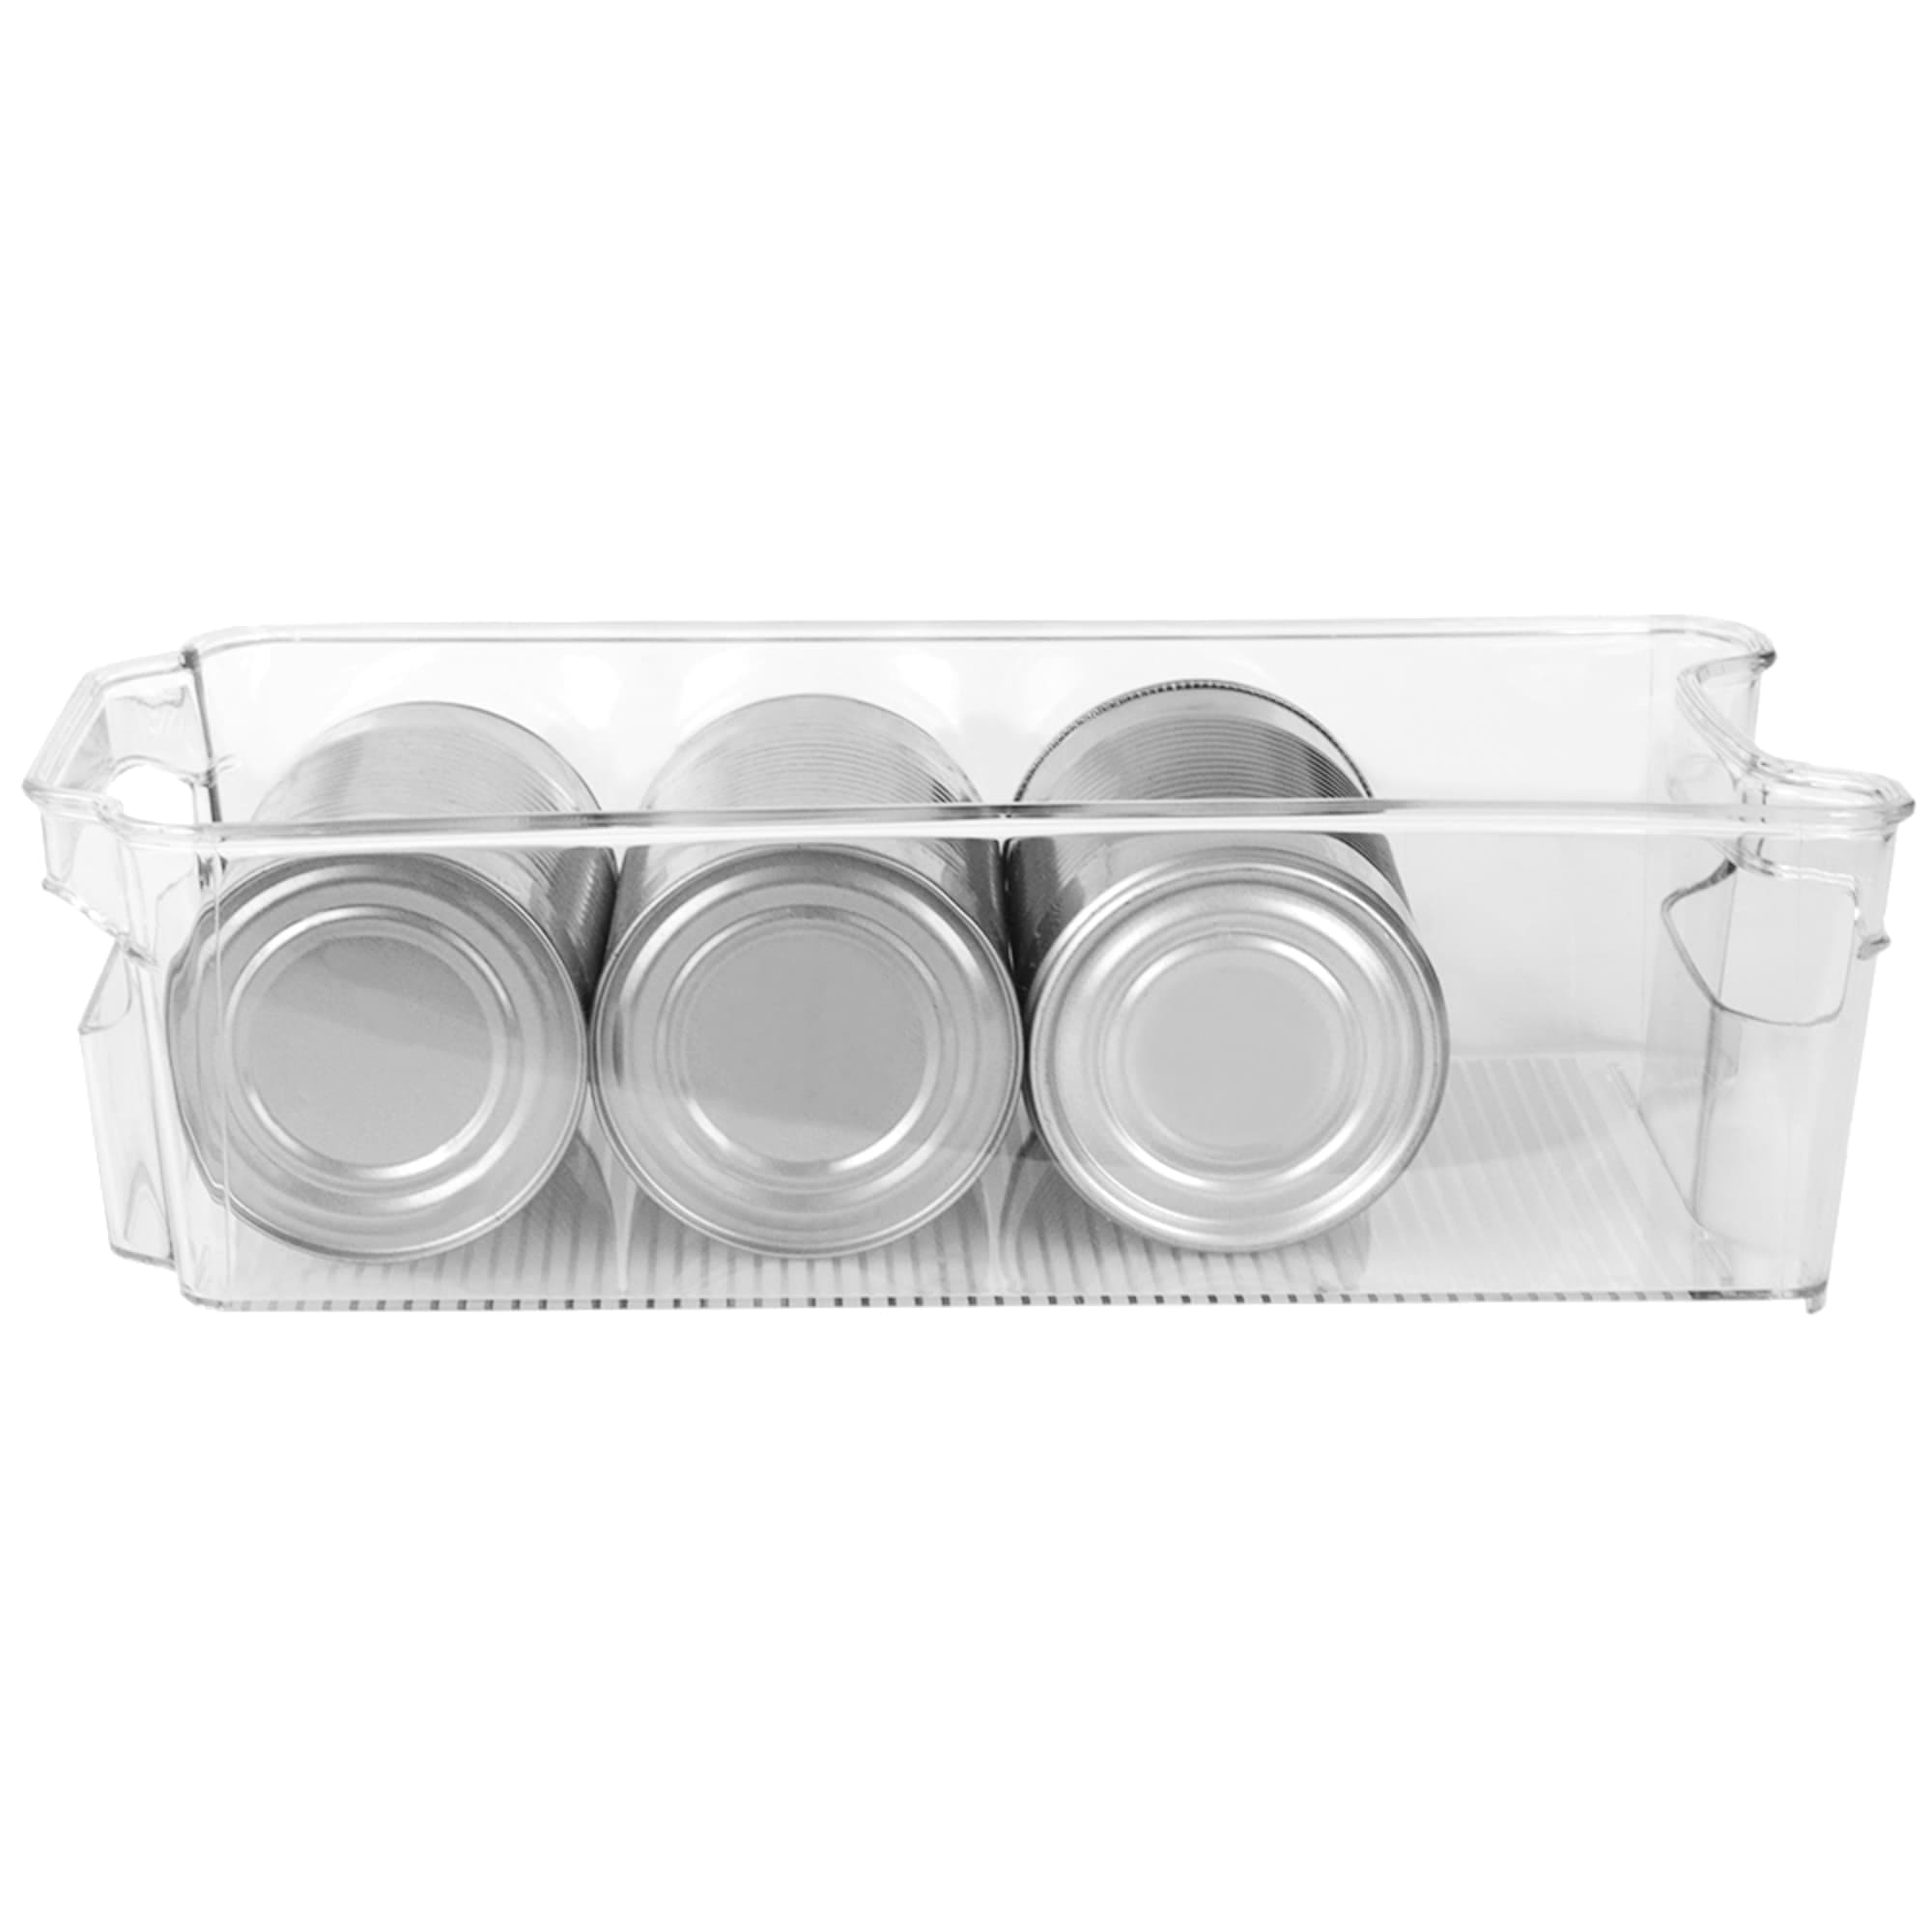 Home Basics Stackable Medium Plastic Fridge Pantry and Closet Organization Bin with Handles $3.00 EACH, CASE PACK OF 12